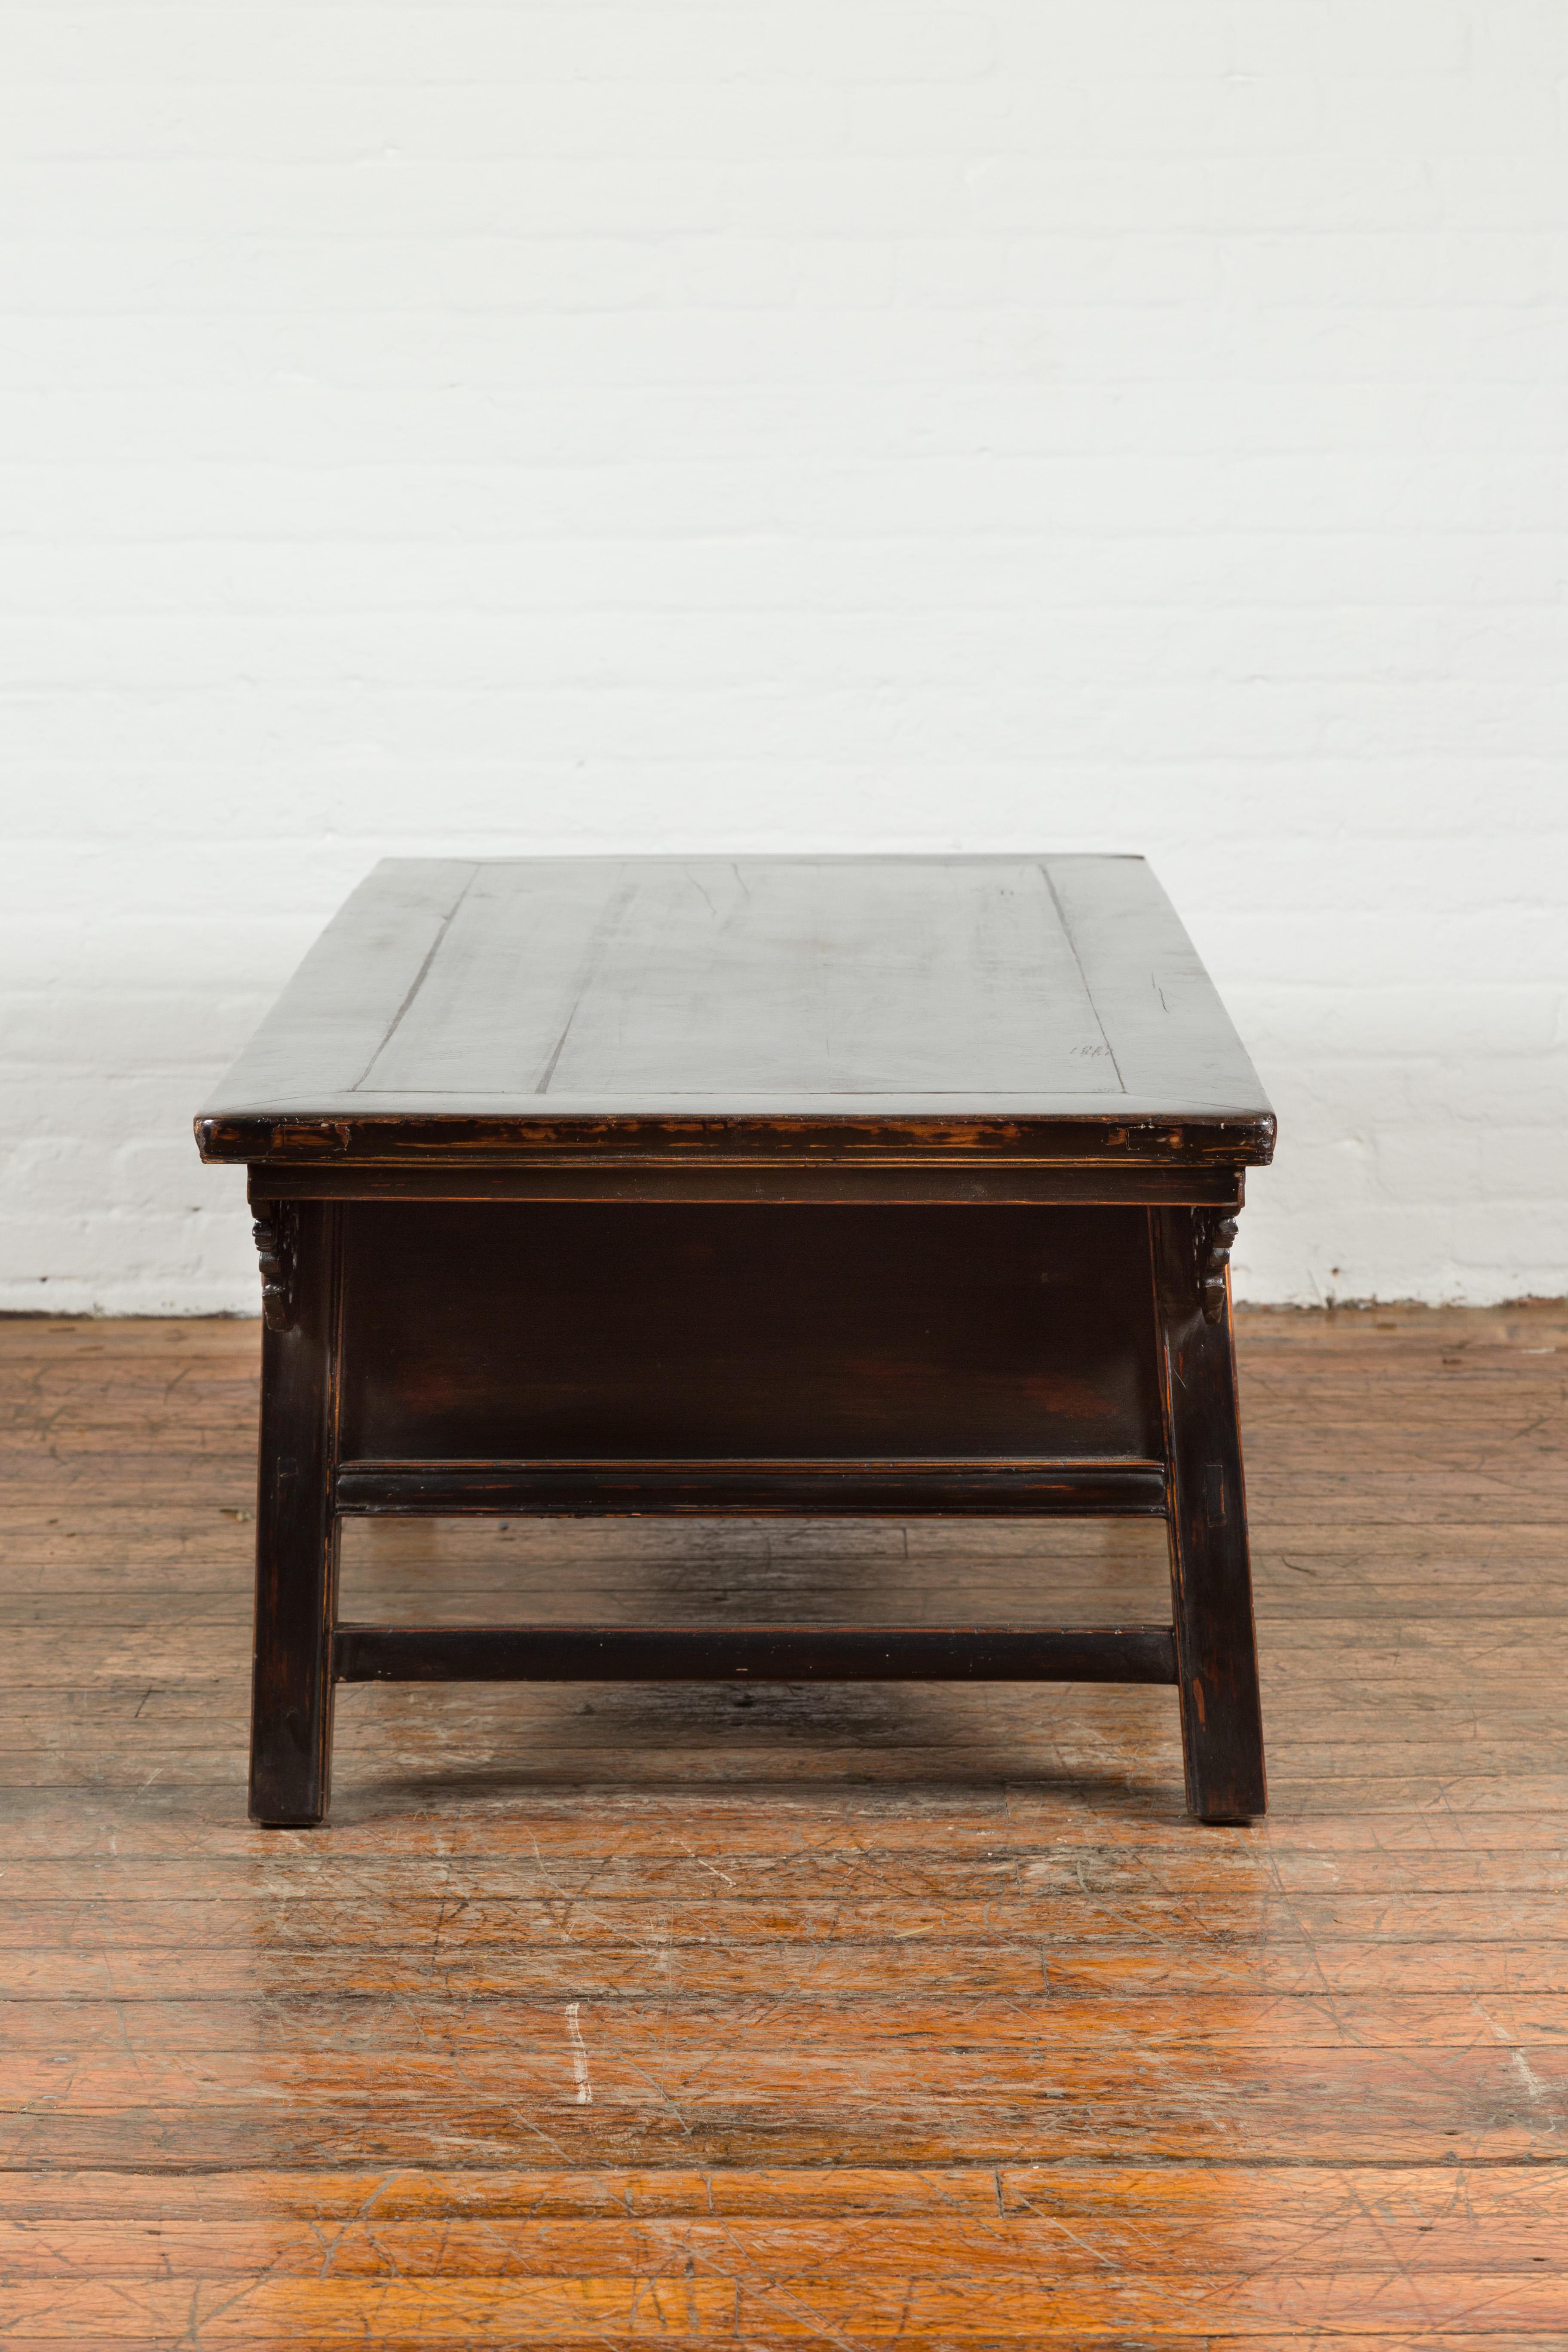 Chinese Qing Dynasty 19th Century Black Lacquer Coffee Table with Two Drawers For Sale 11